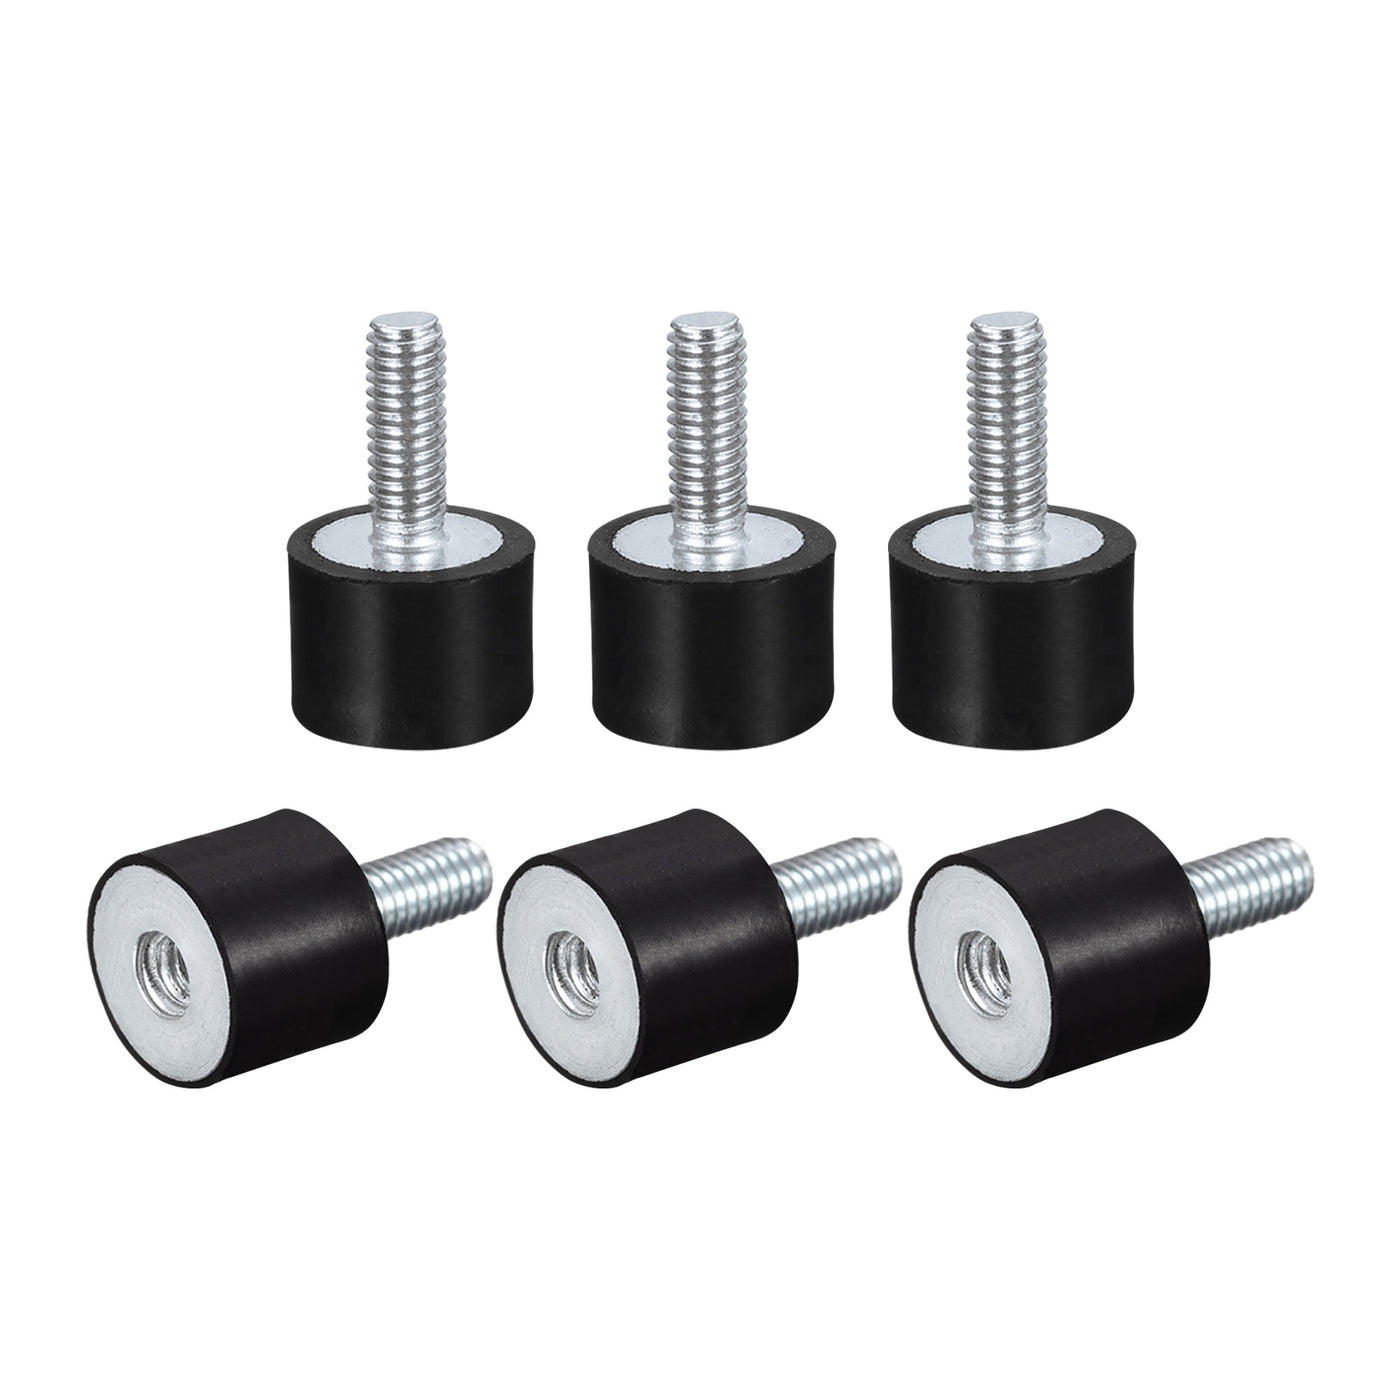 uxcell Uxcell Rubber Mount 6pcs M5 Male/Female Vibration Isolator Shock Absorber, D15mmxH15mm